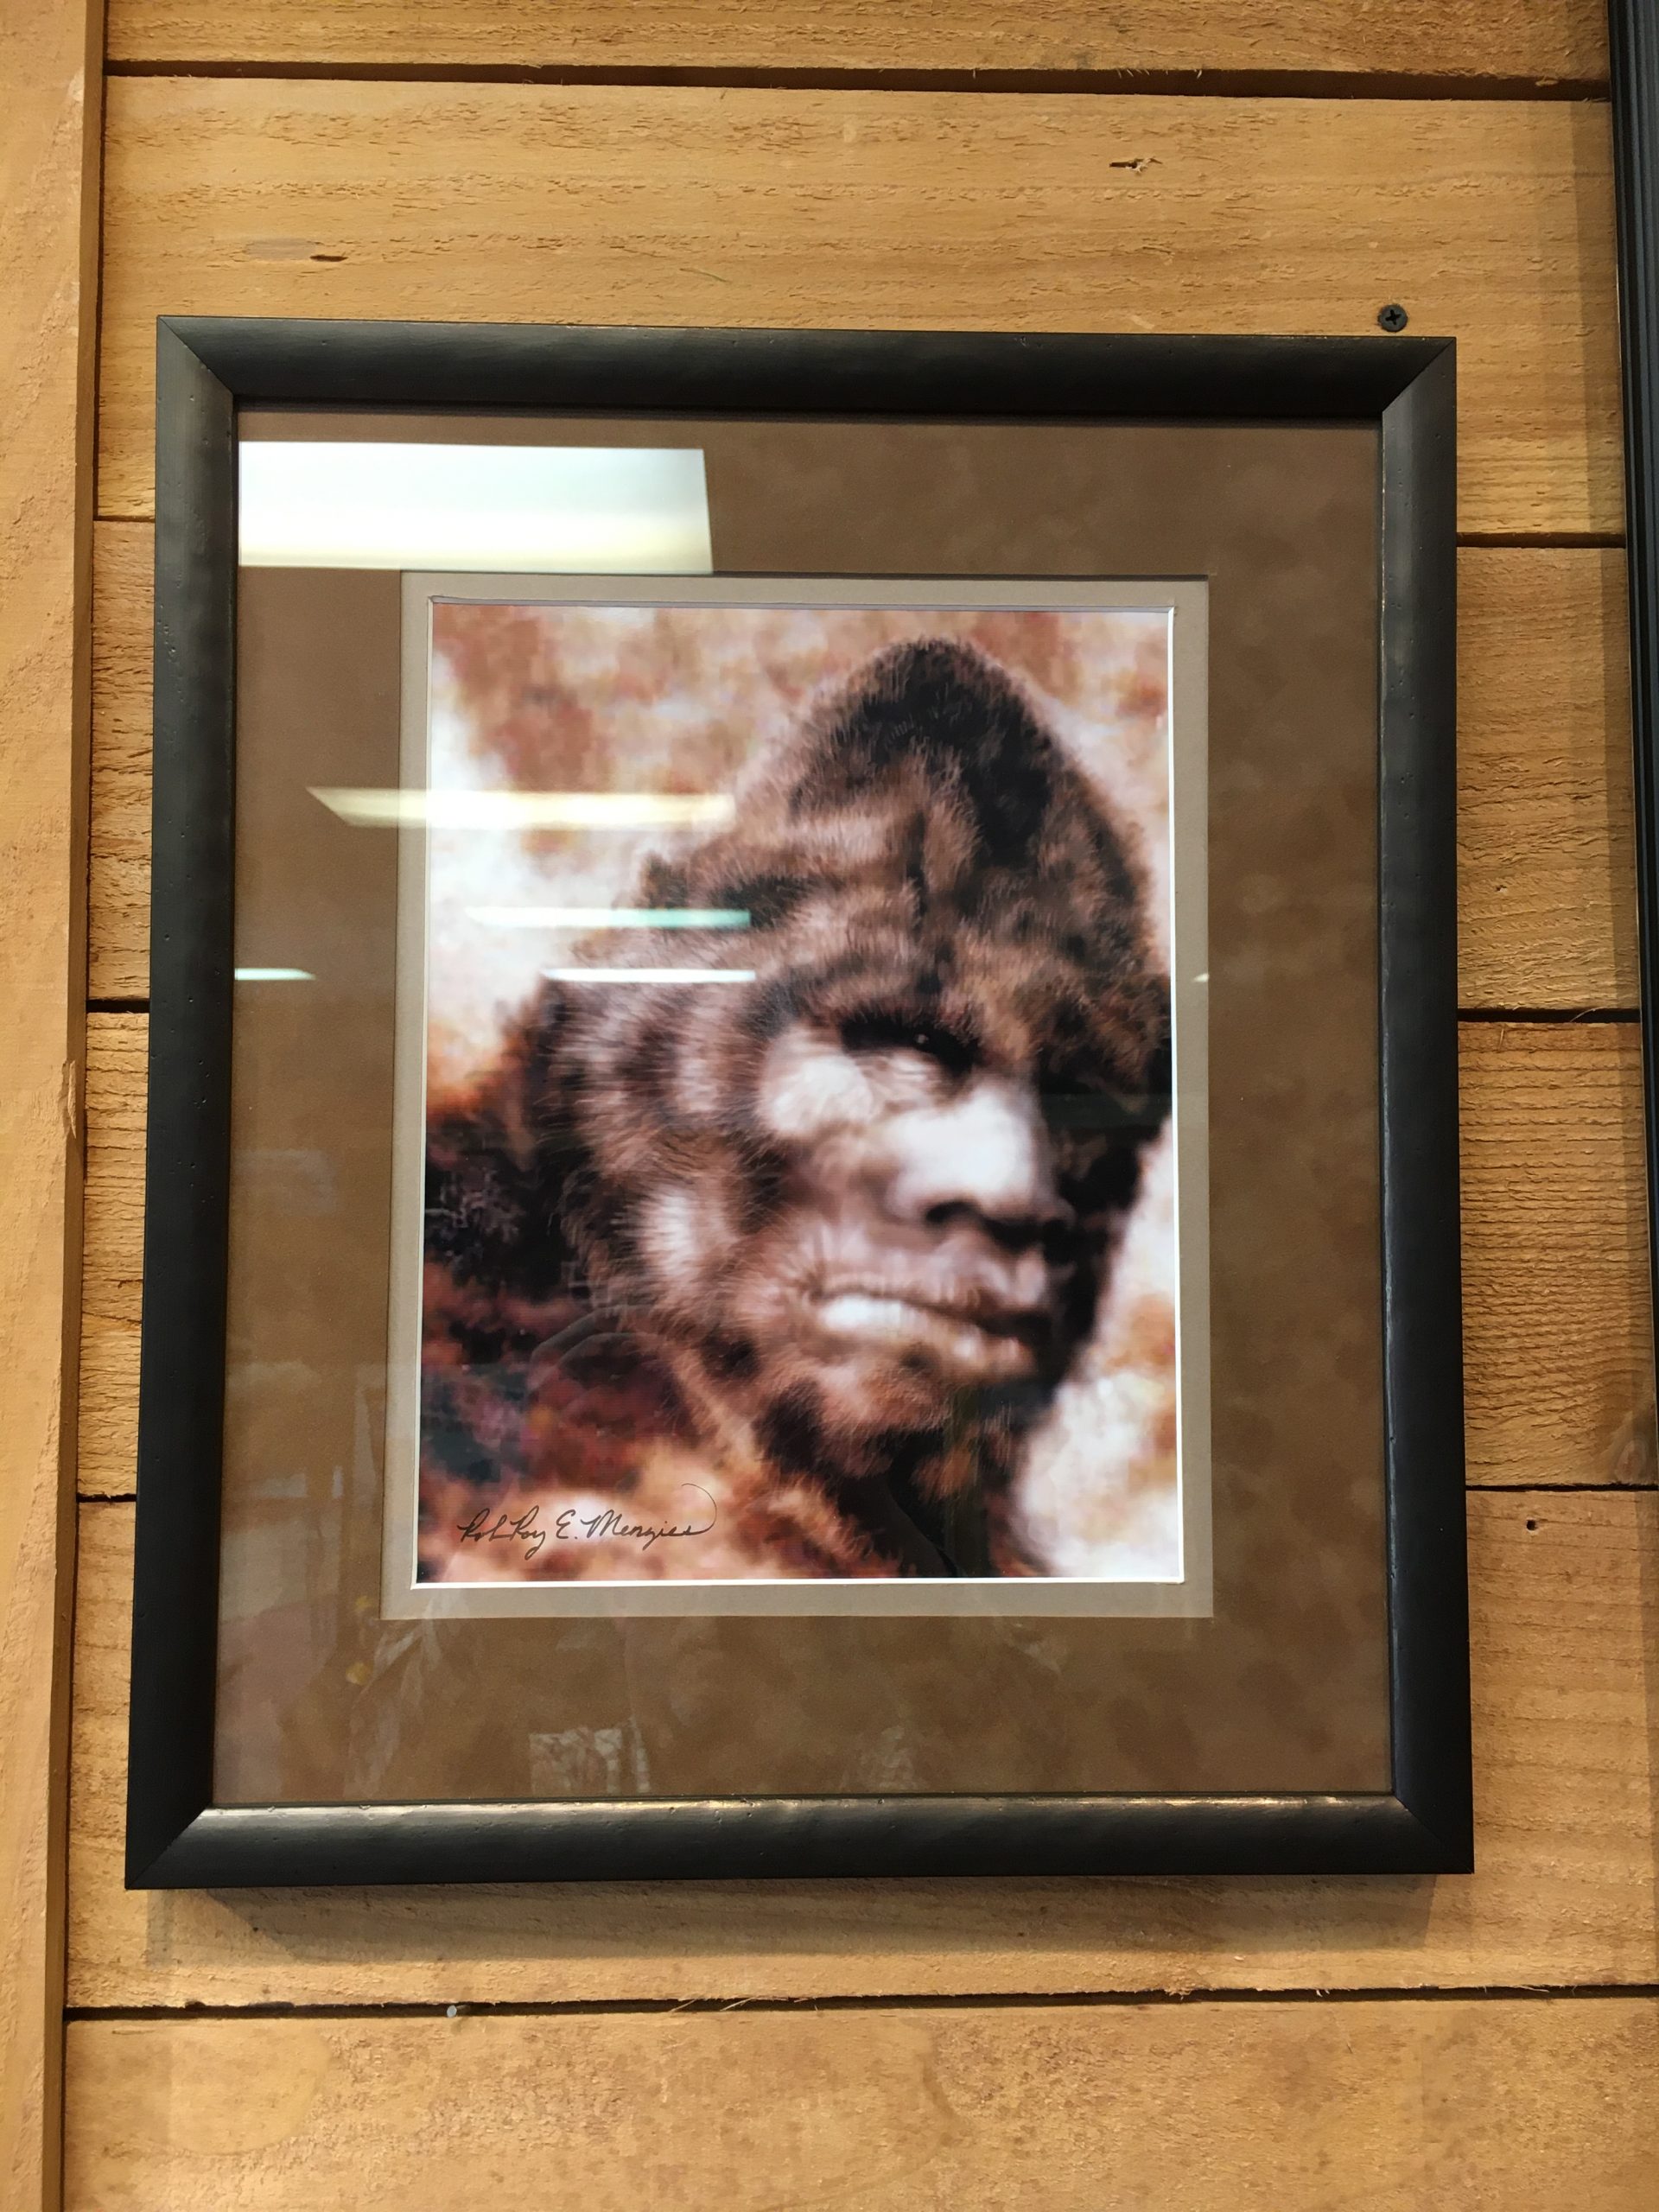 Bigfoot - Framed art you can find and purchase at the gallery.